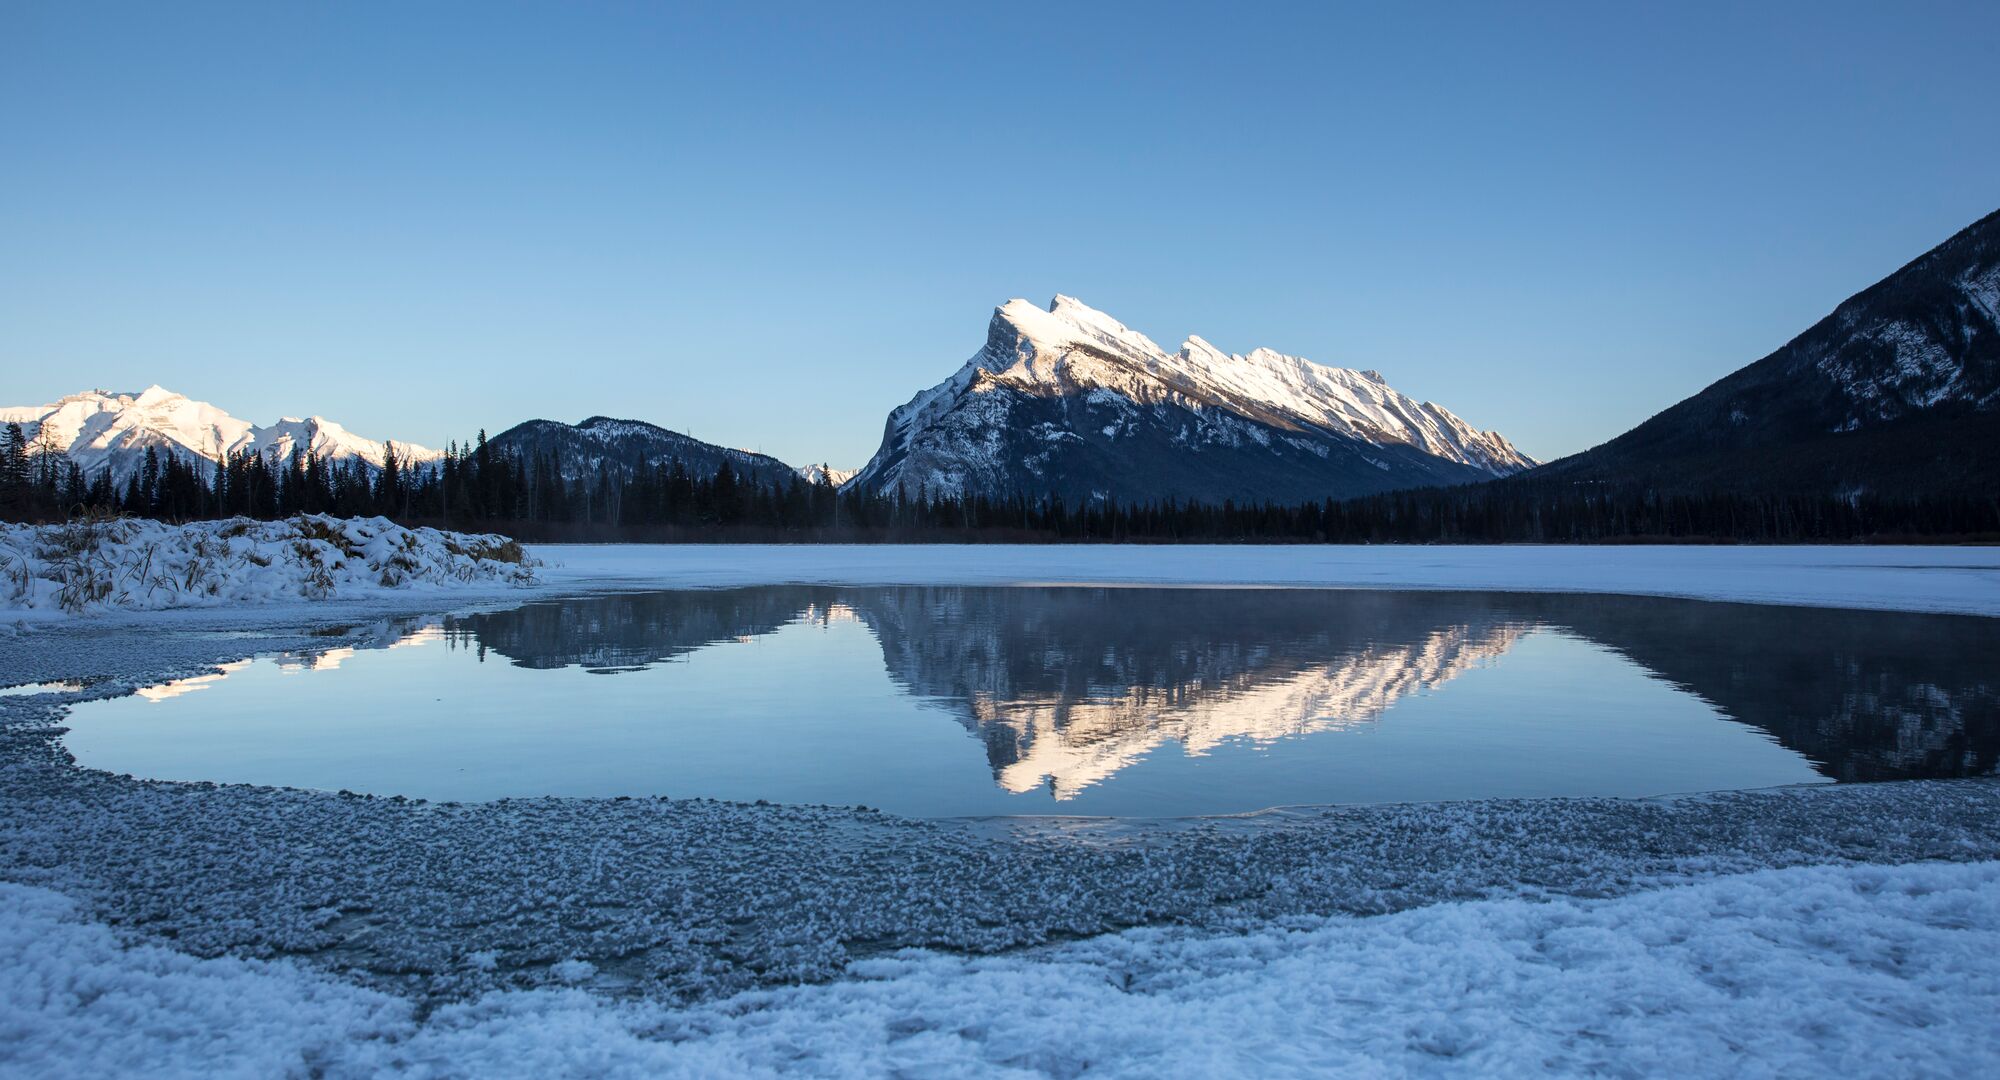 A view of Vermilion Lakes frozen over in the winter